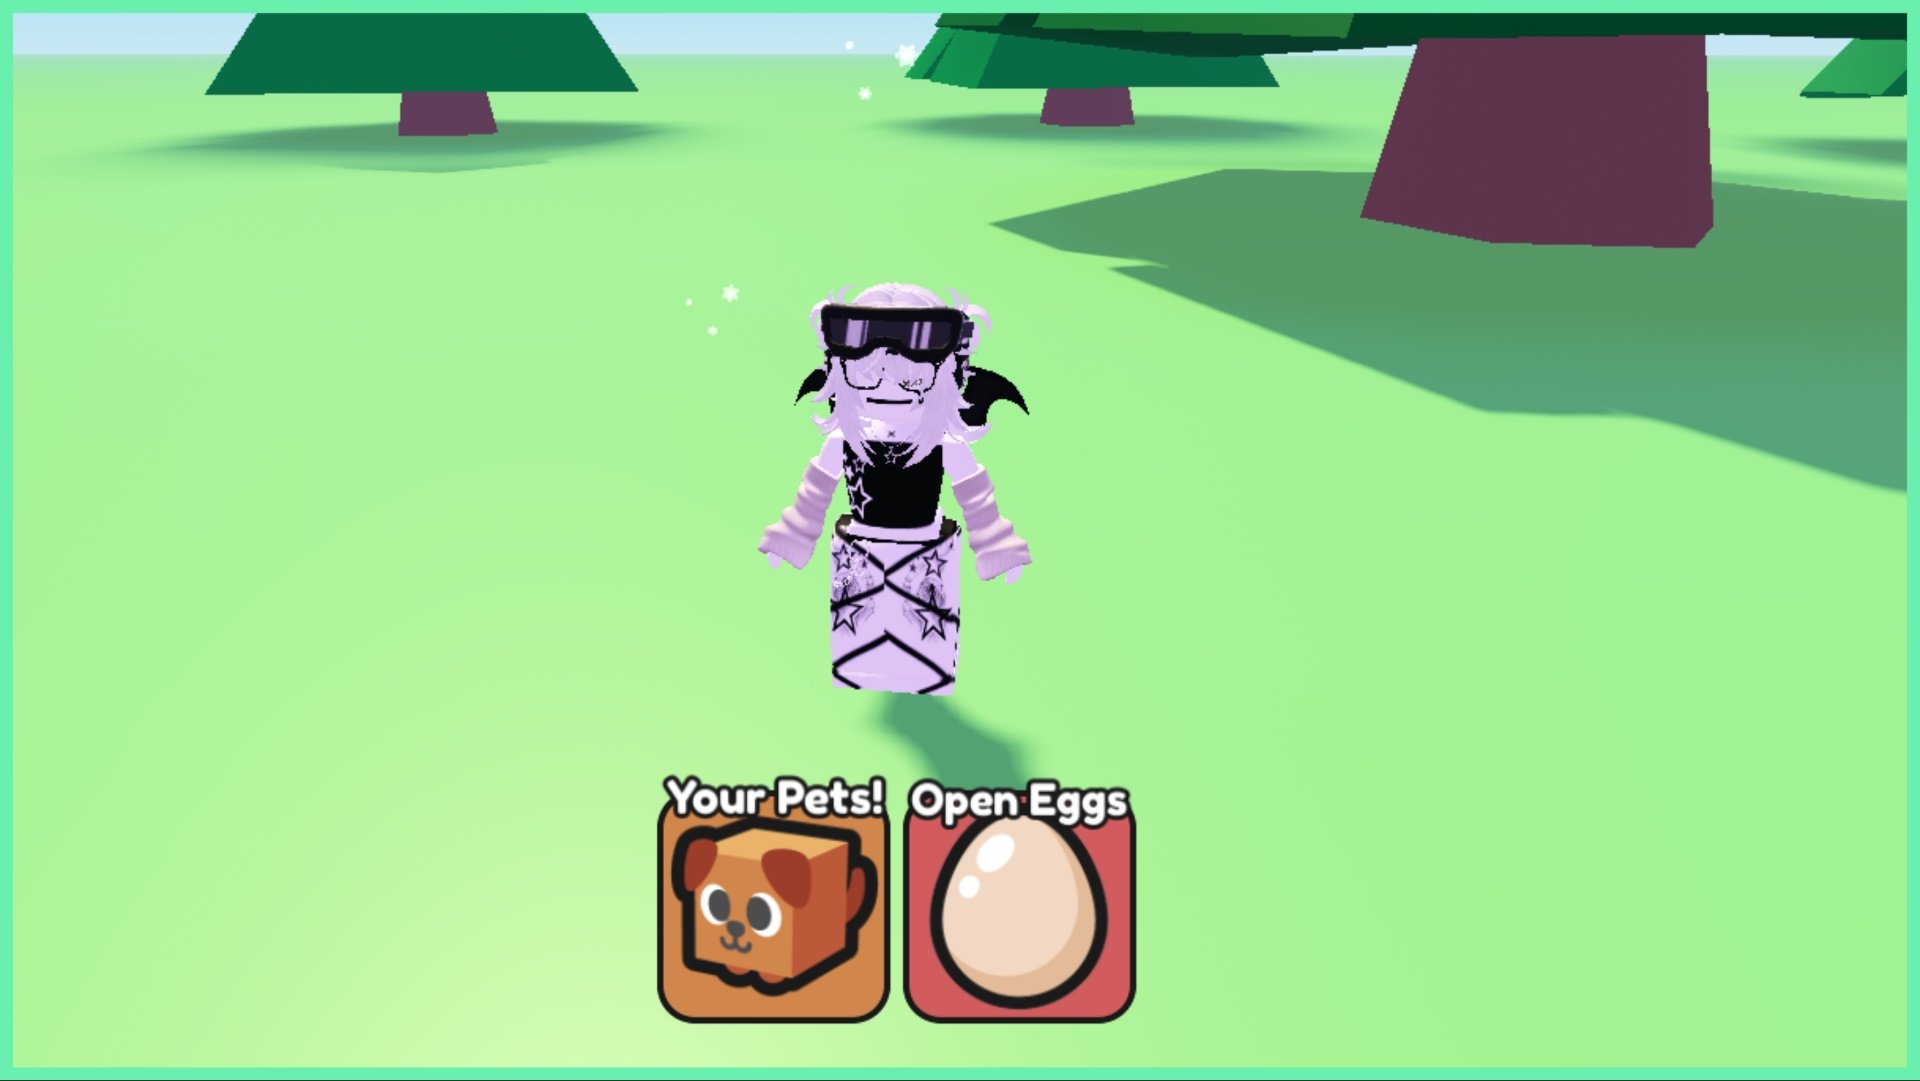 the image shows my avatar stood in an open grassy area whilst being completely still to earn points. In the bottom are two buttons for PETS and EGGS.